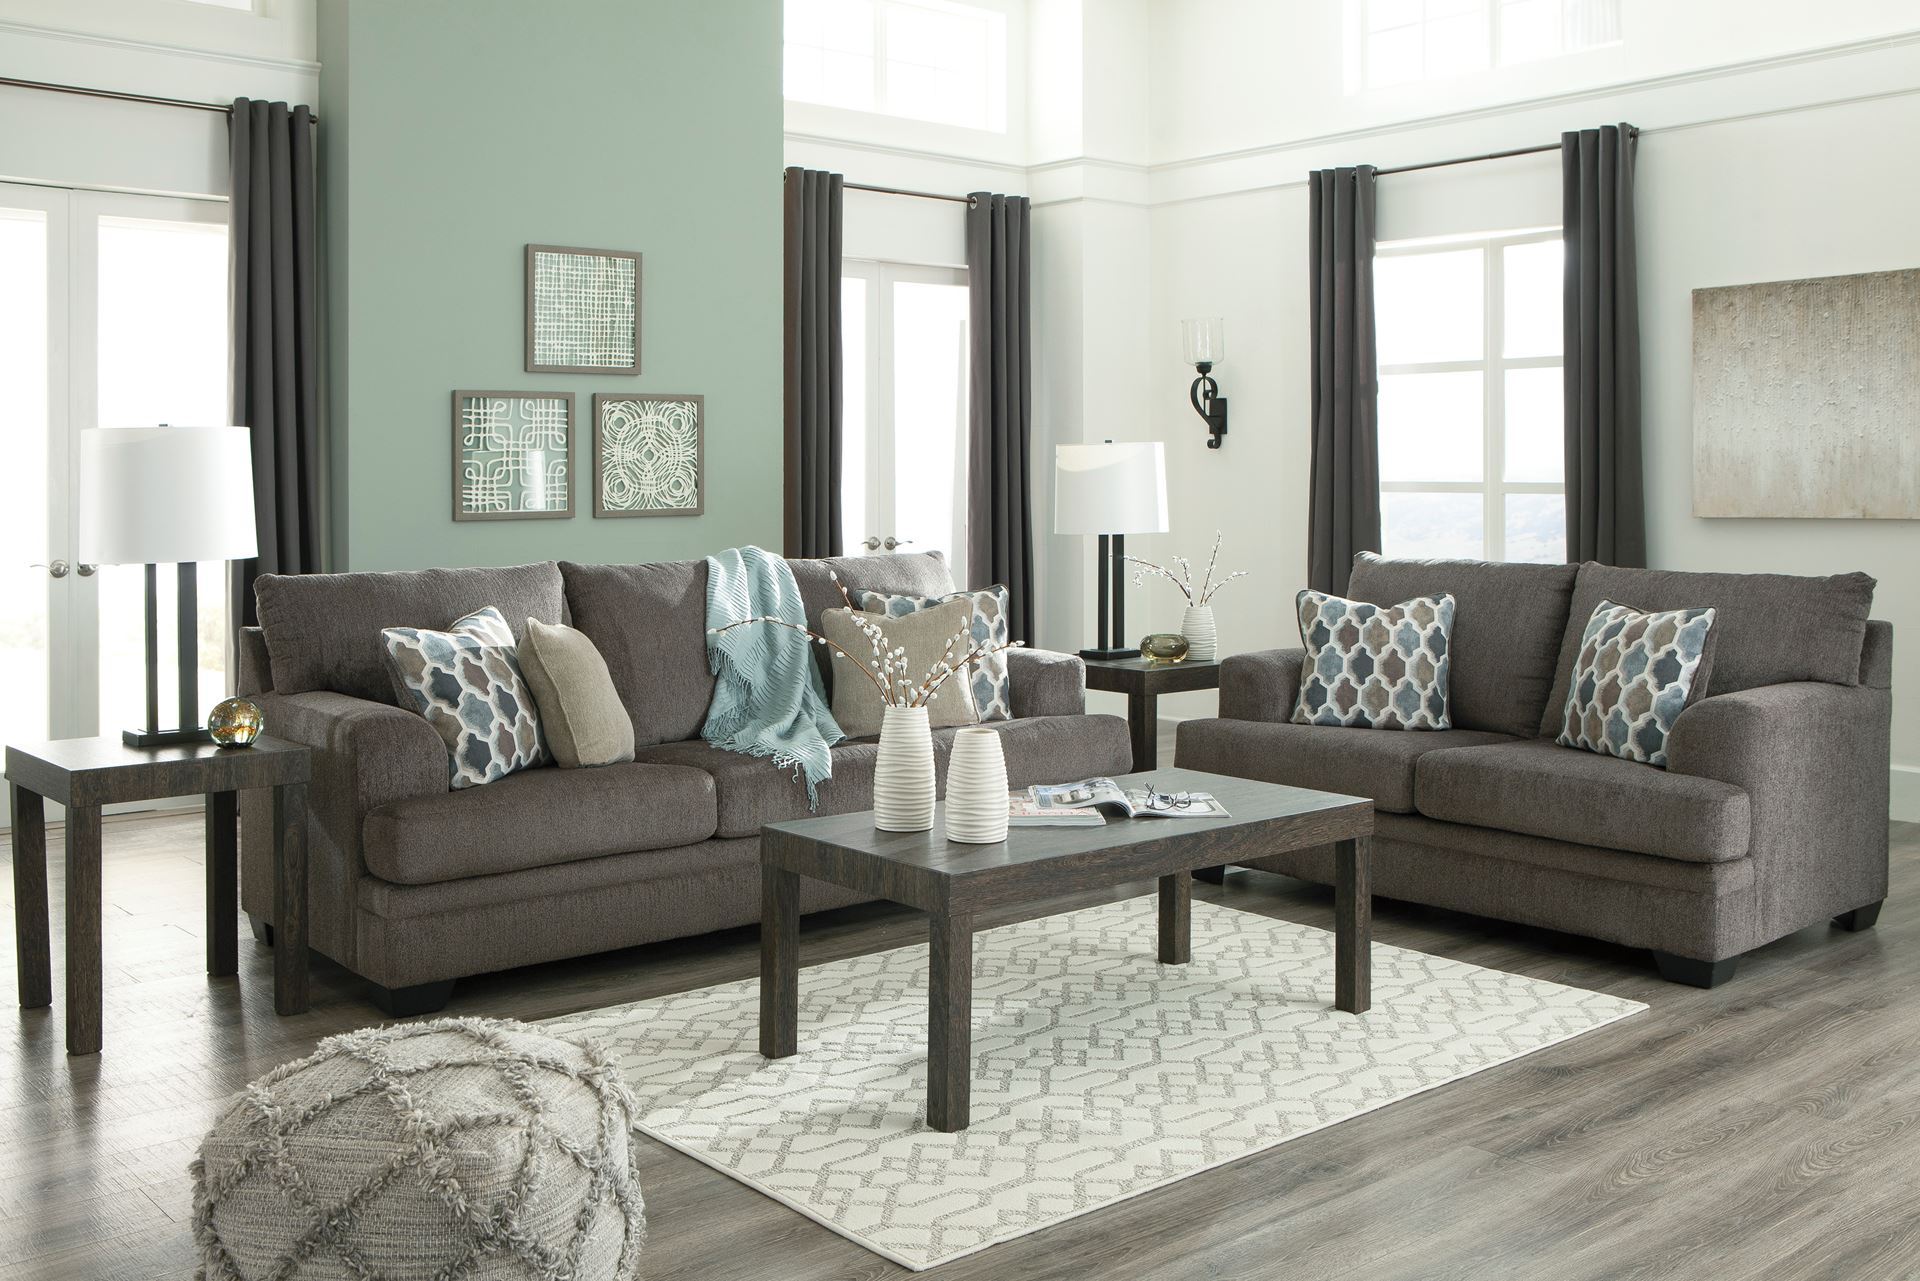 slate couch living room ideas